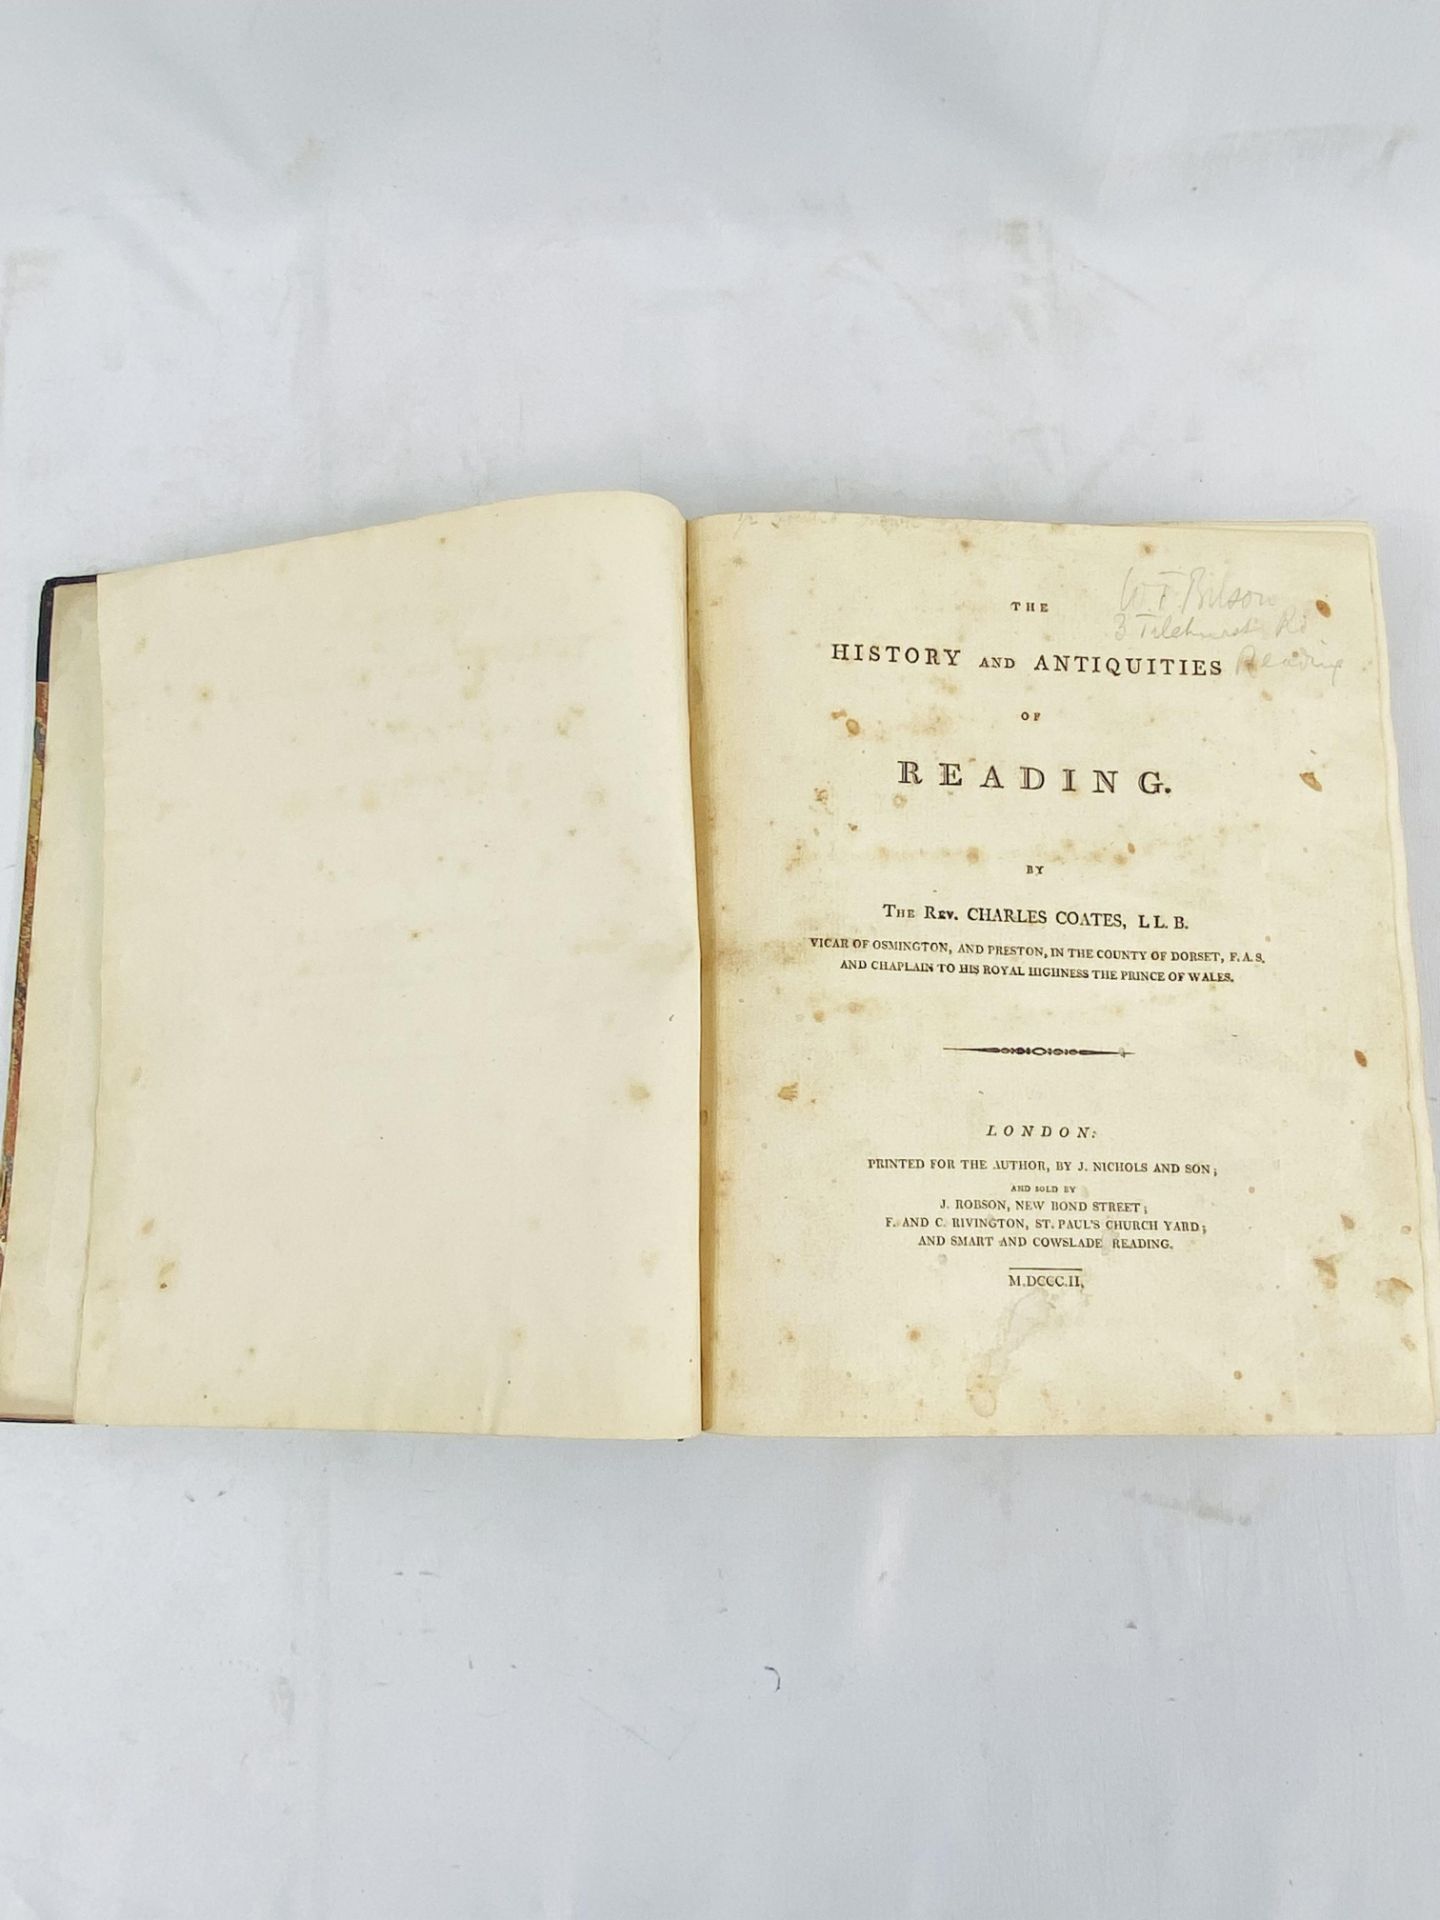 The History and Antiquities of Reading by The Rev. Charles Coates, 1802 - Image 2 of 4